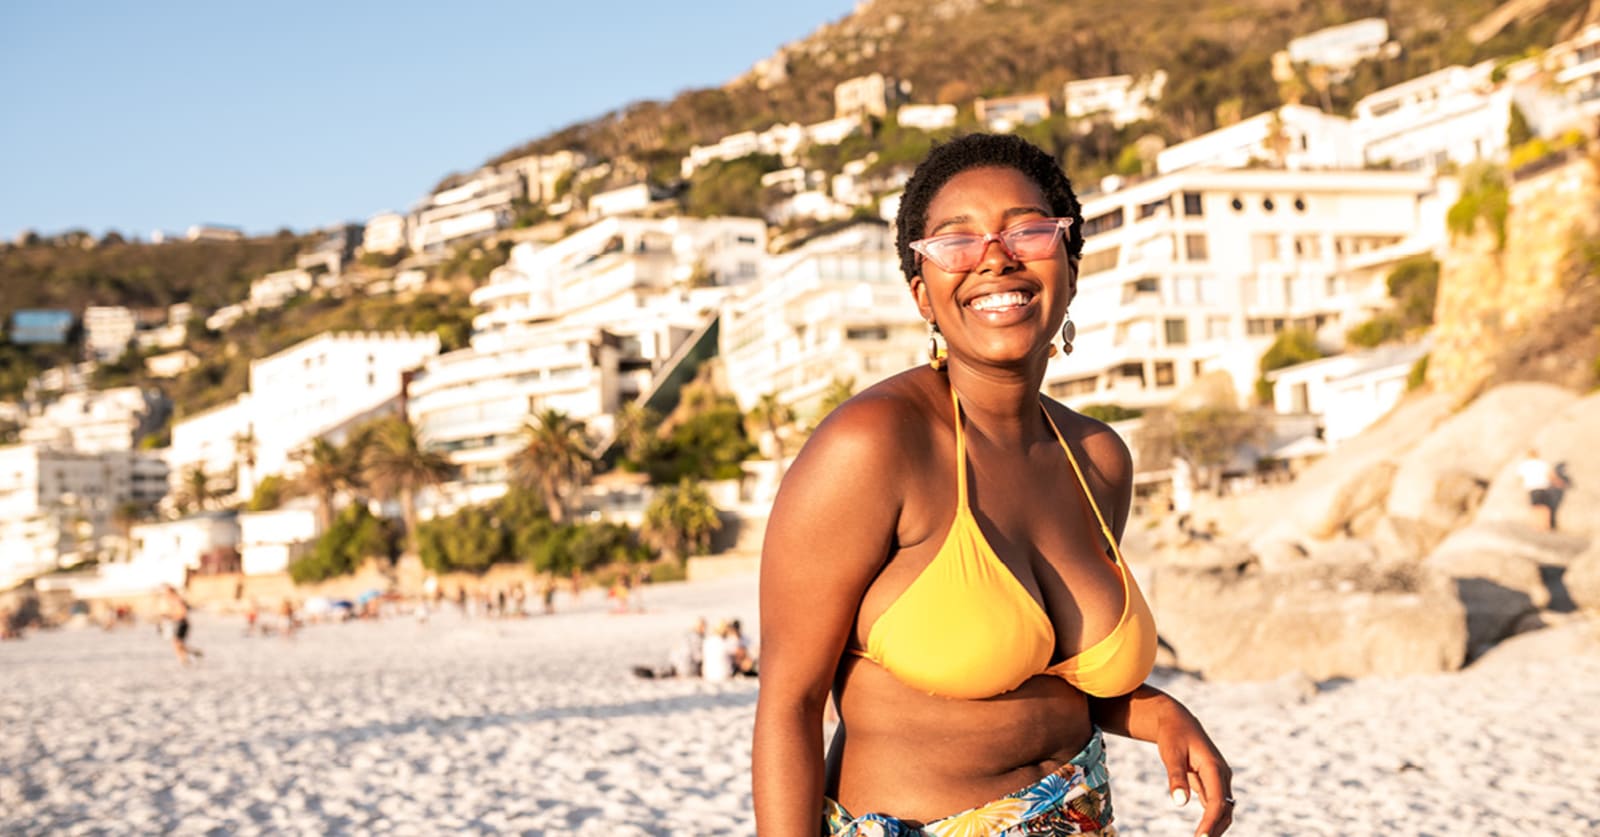 Woman with sunglasses and yellow bikini top smiles on a beach with bright hotel buildings in the background